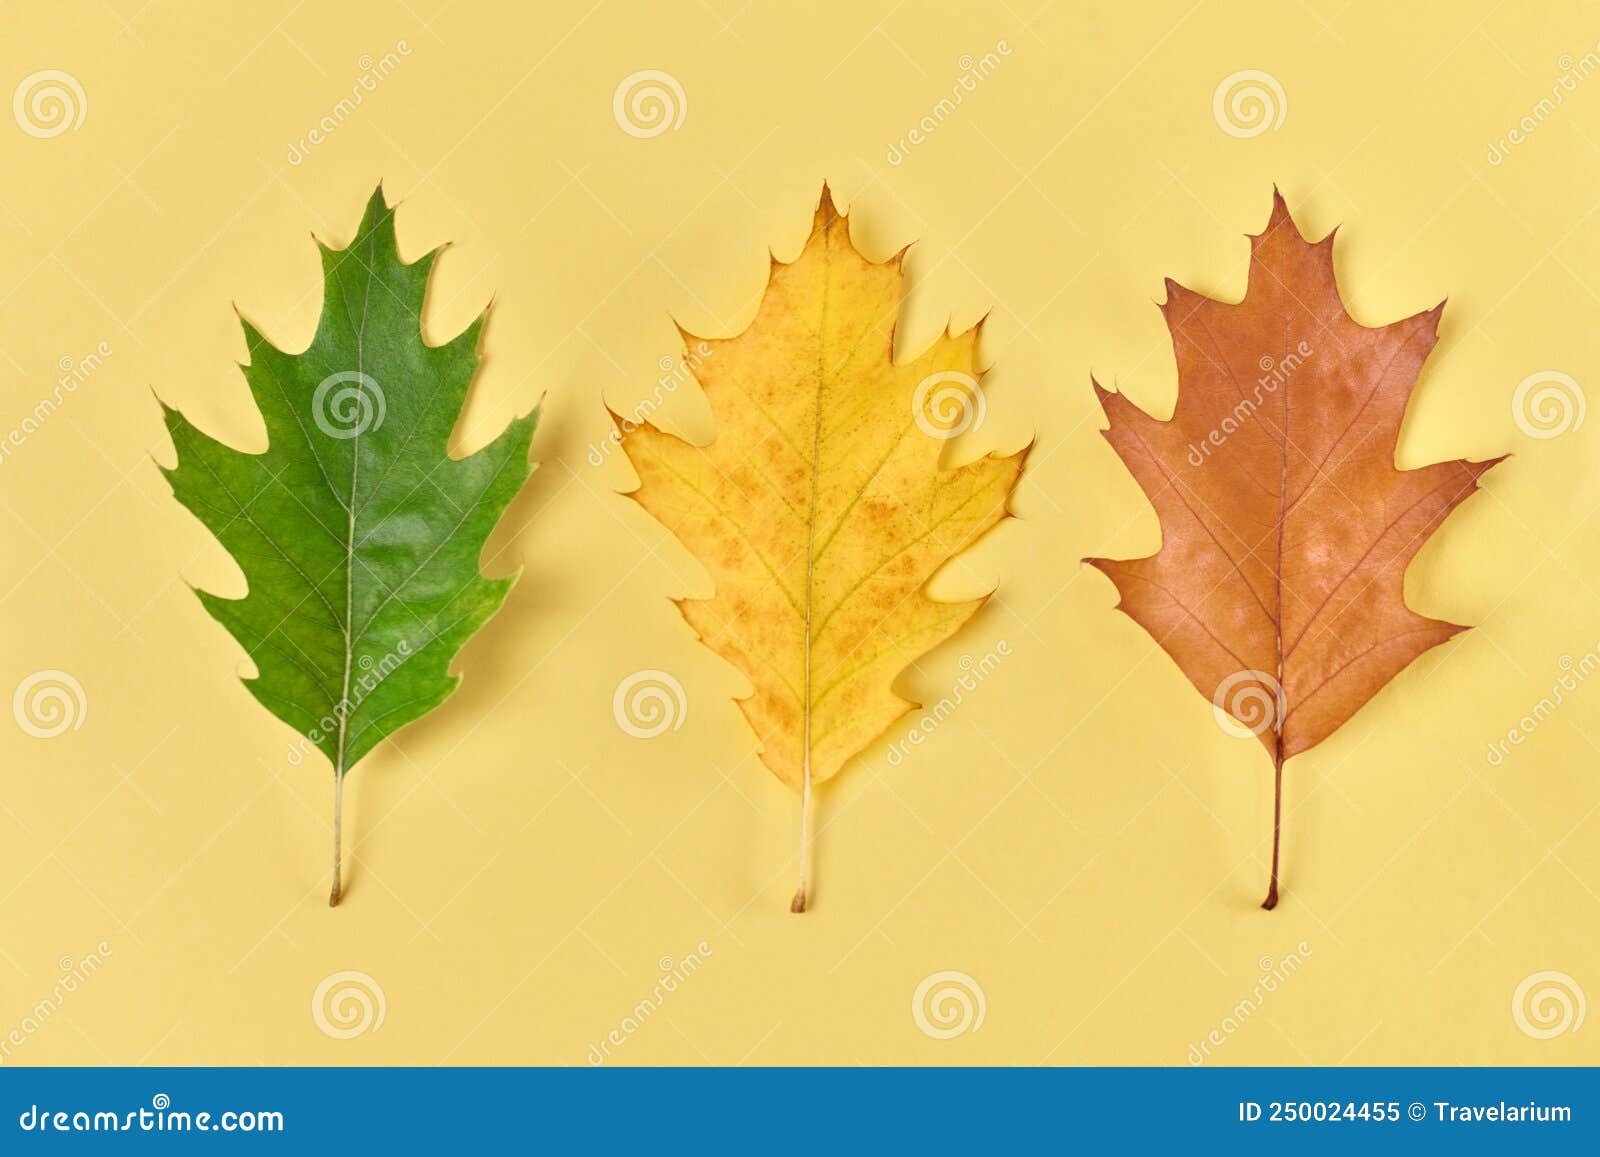 Three Oak Leaves Green, Yellow, Red Leaves on Yellow Background, Seasons  Change Concept Stock Image - Image of leaf, foliage: 250024455